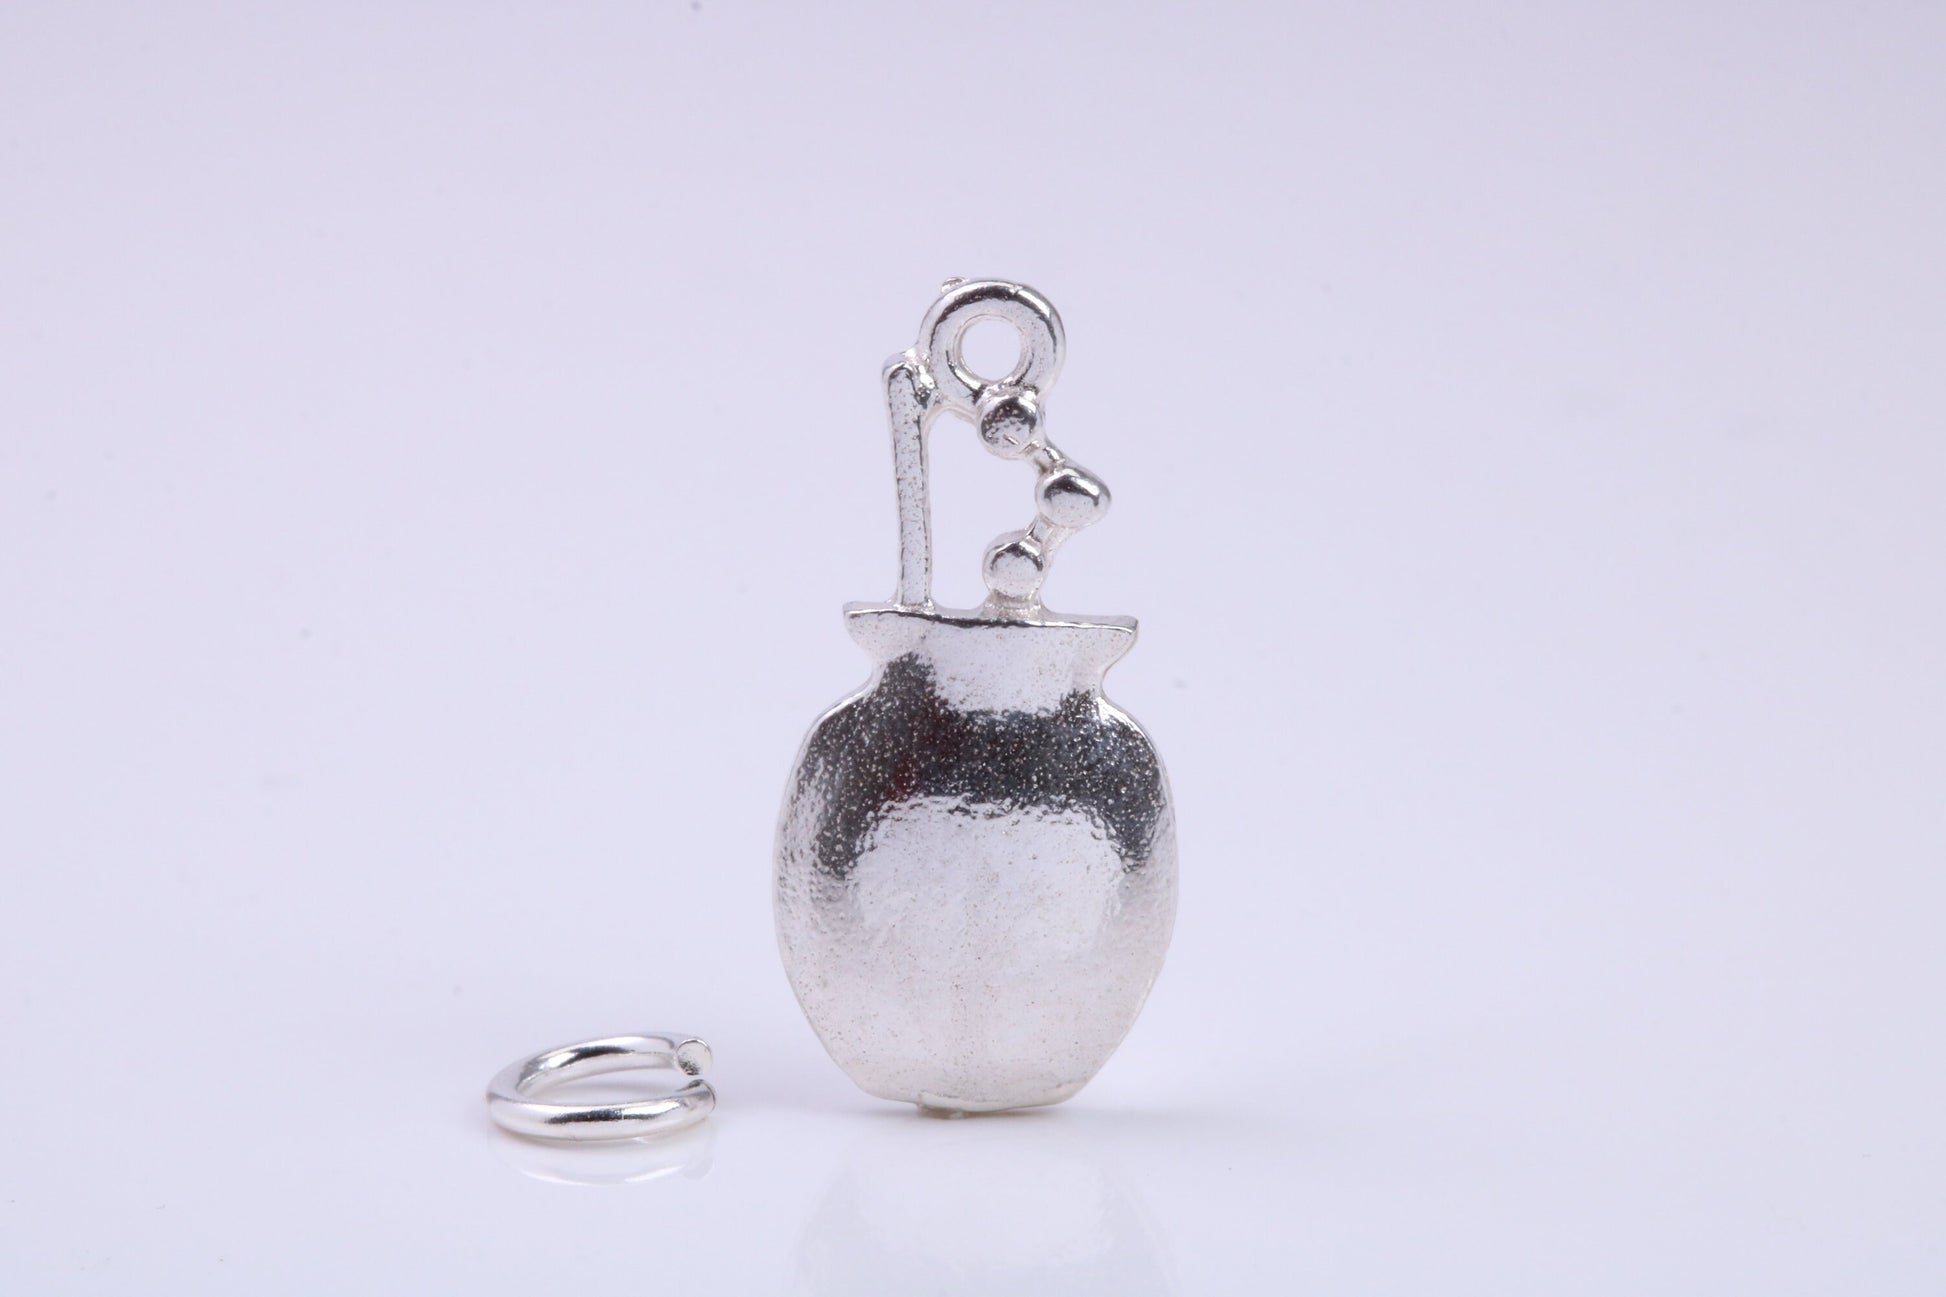 Cooking Pot Charm, Traditional Charm, Made from Solid 925 Grade Sterling Silver, Complete with Attachment Link